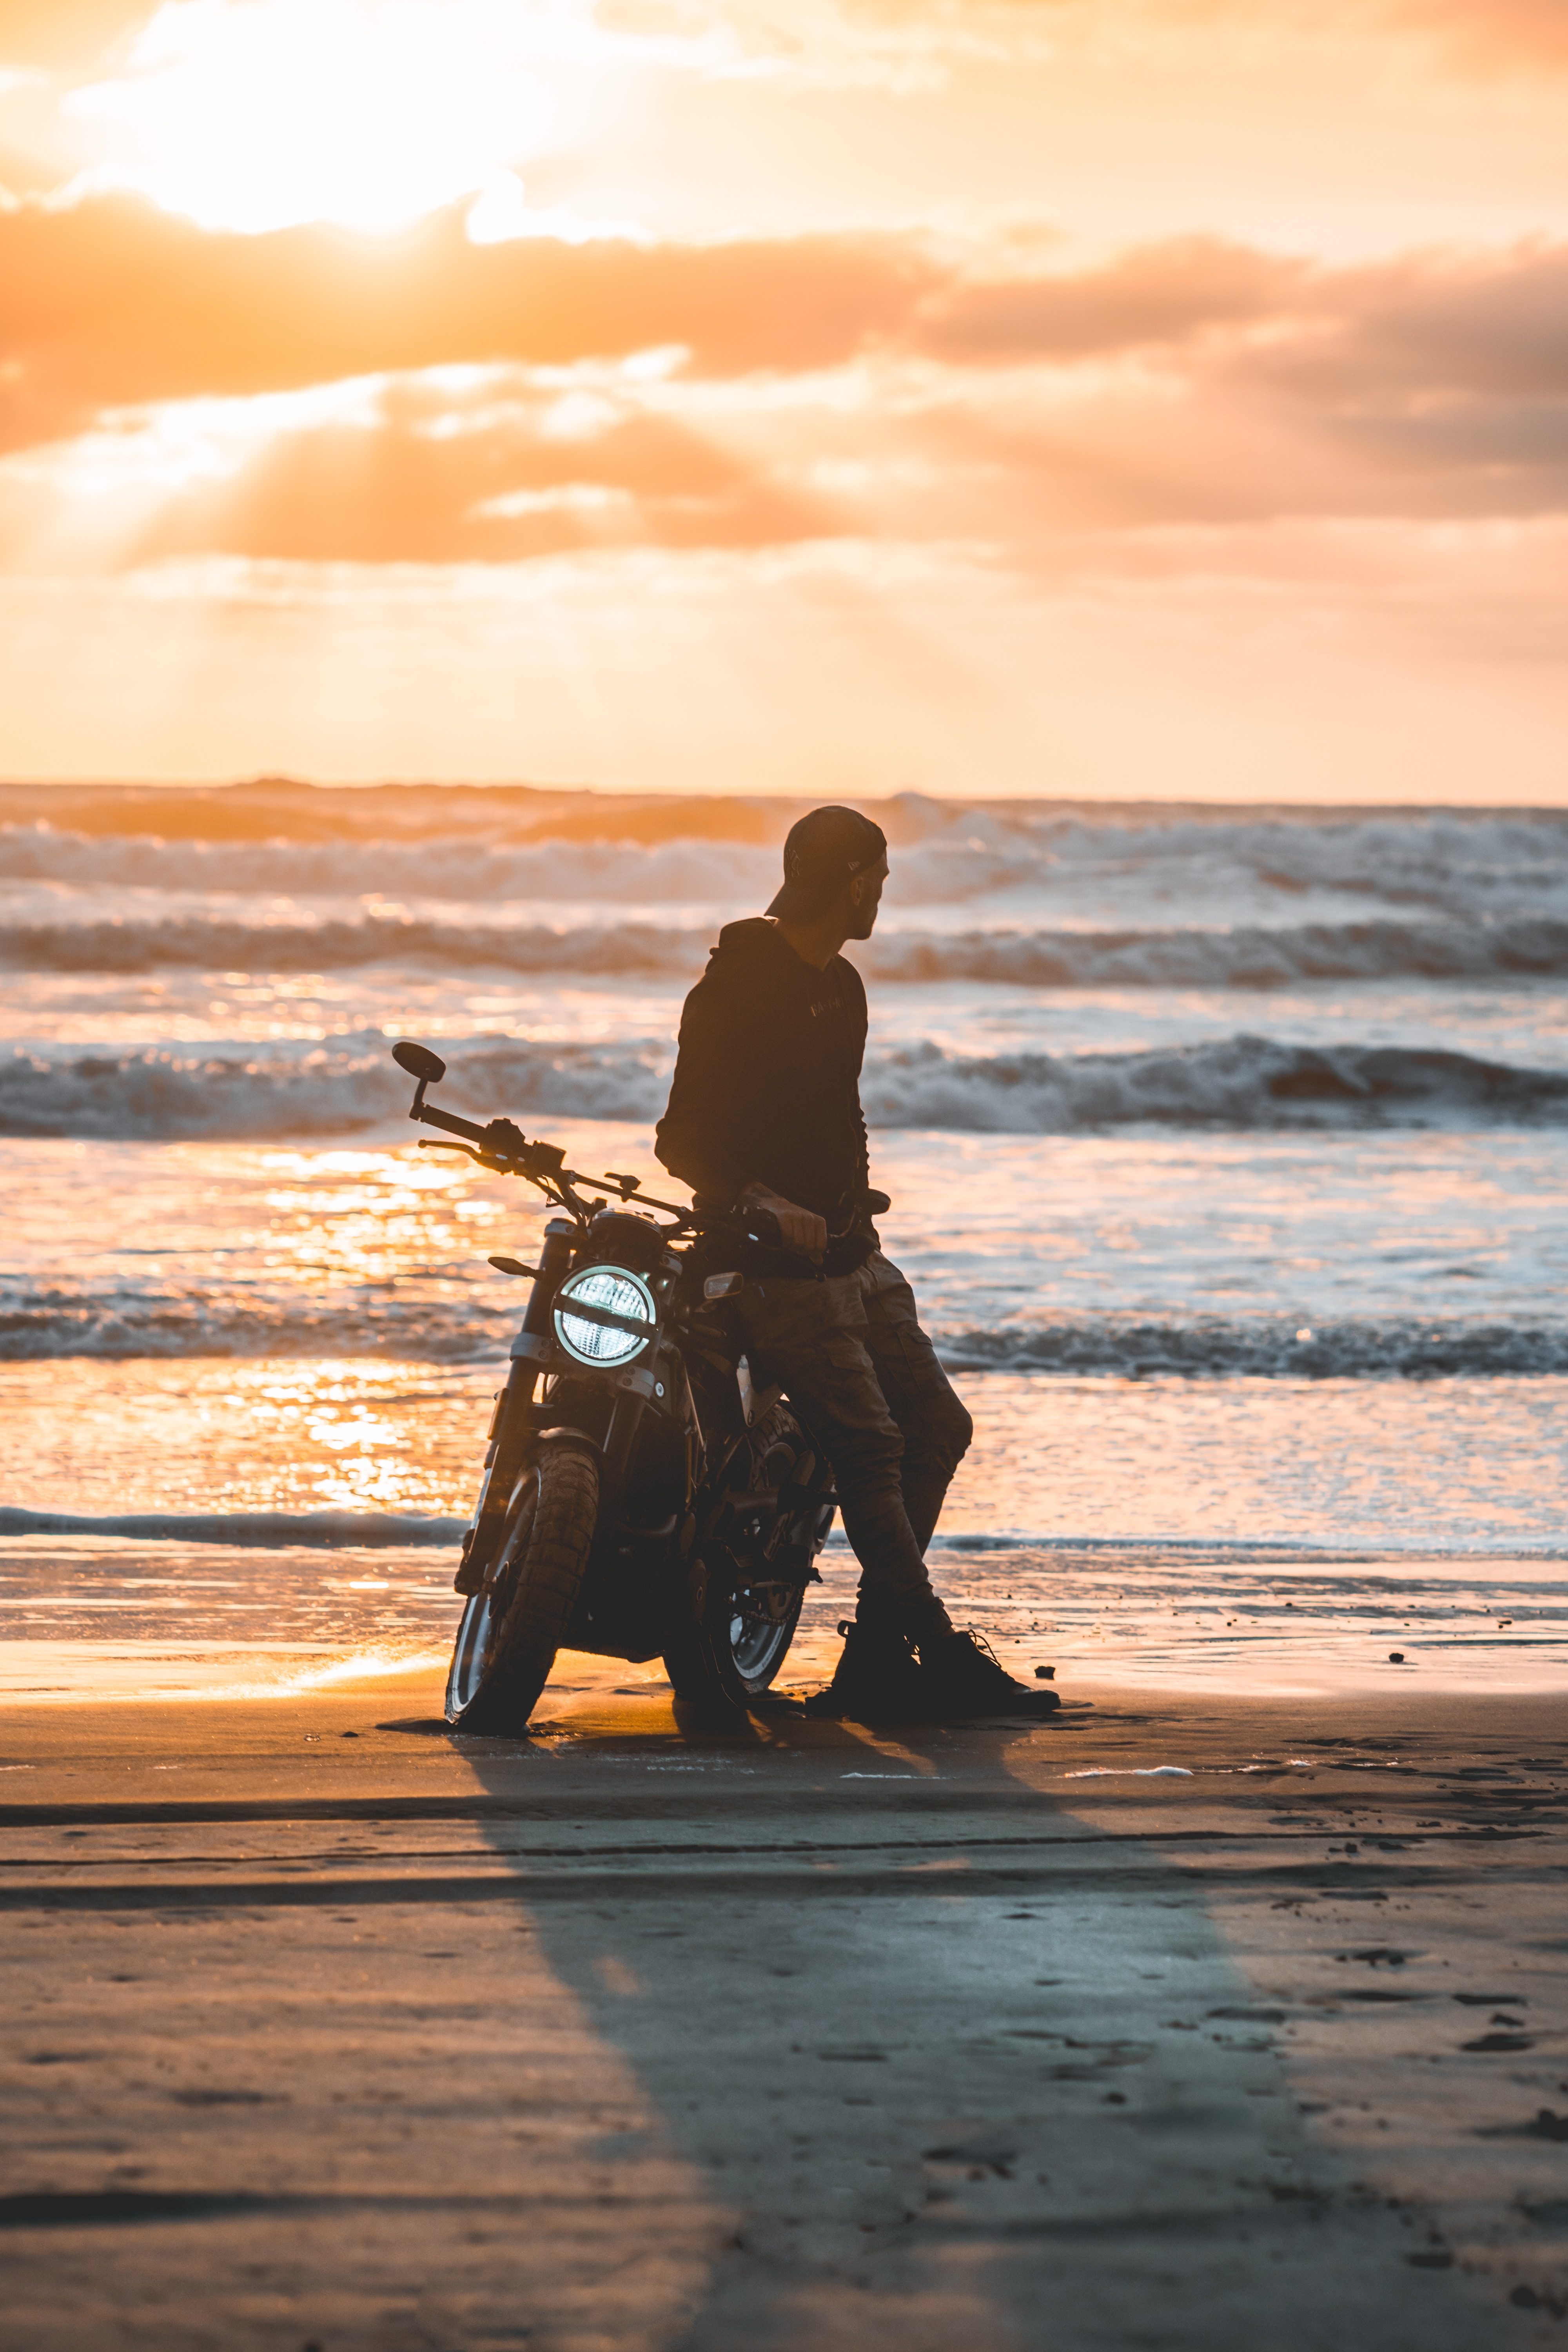 motorcycle, loneliness, motorcycles, motorcyclist, sunset, silhouette